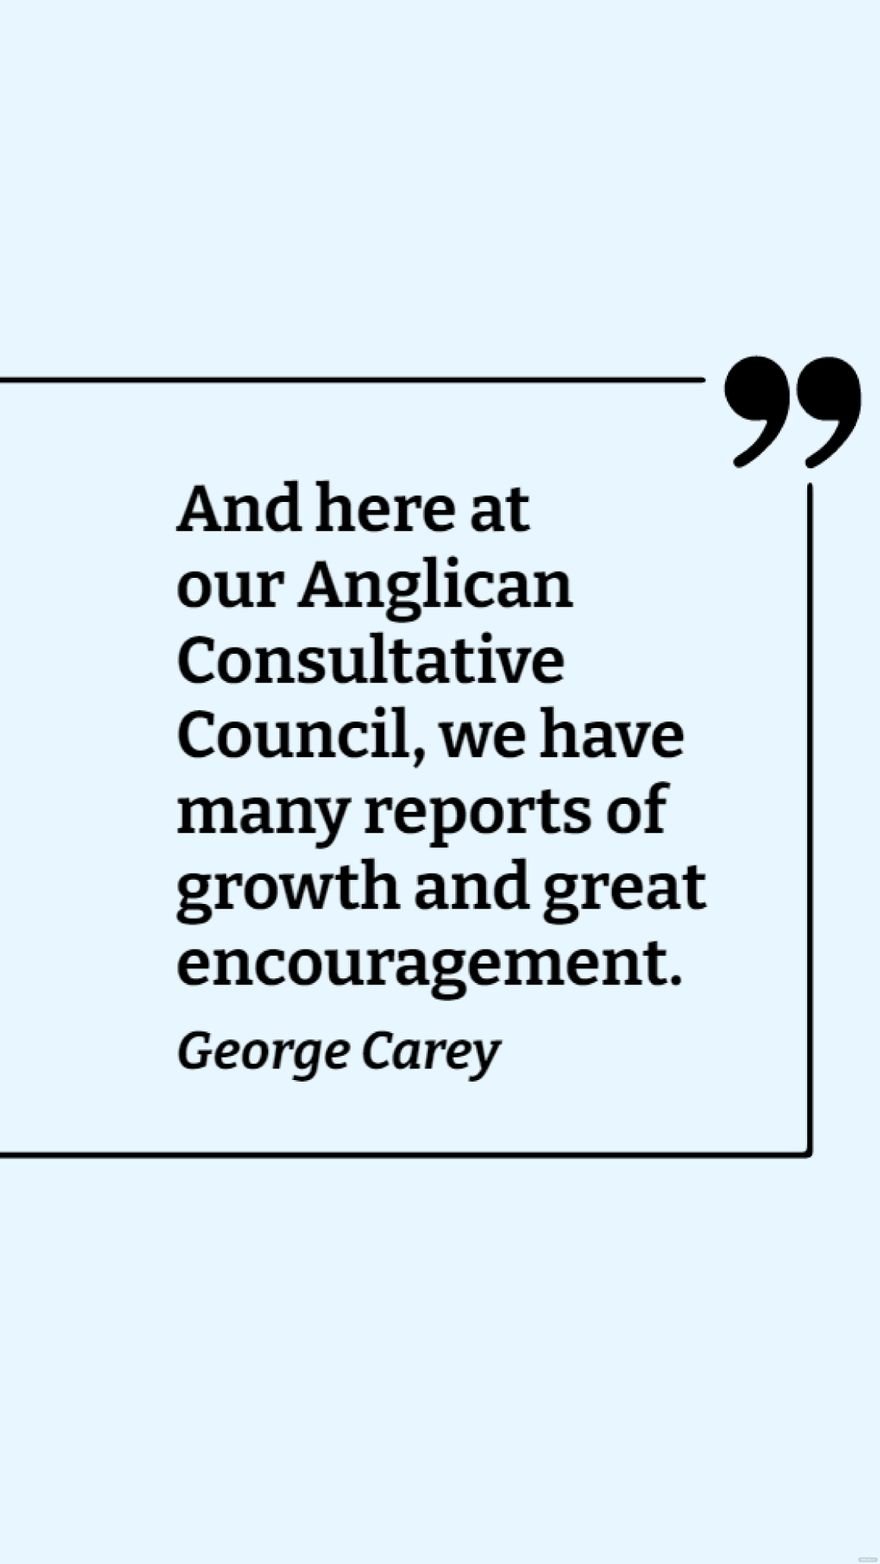 Free George Carey - And here at our Anglican Consultative Council, we have many reports of growth and great encouragement. Template